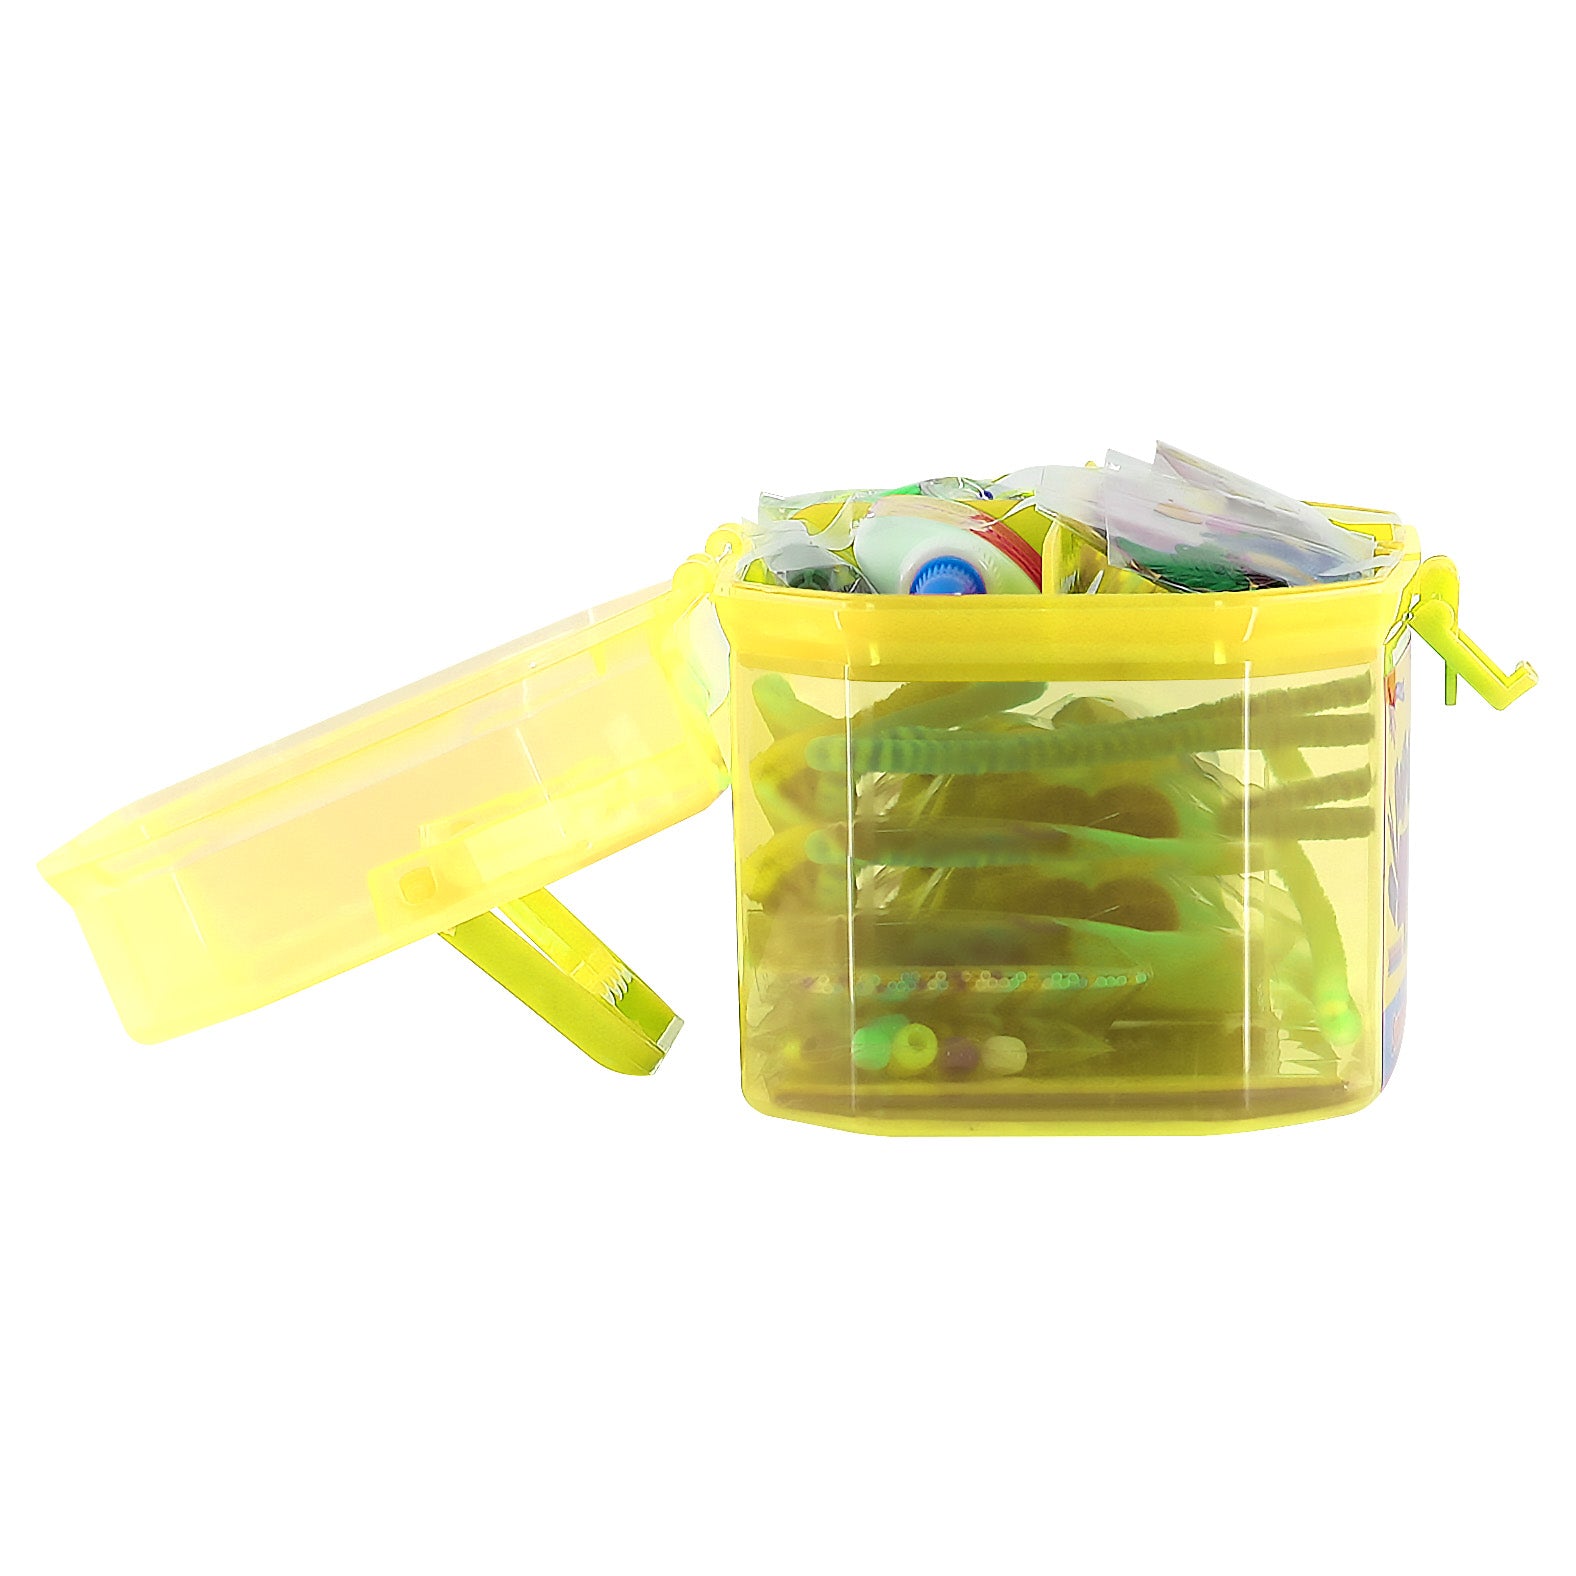 Yellow Kids Super Craft Carry Case The Magic Toy Shop - The Magic Toy Shop